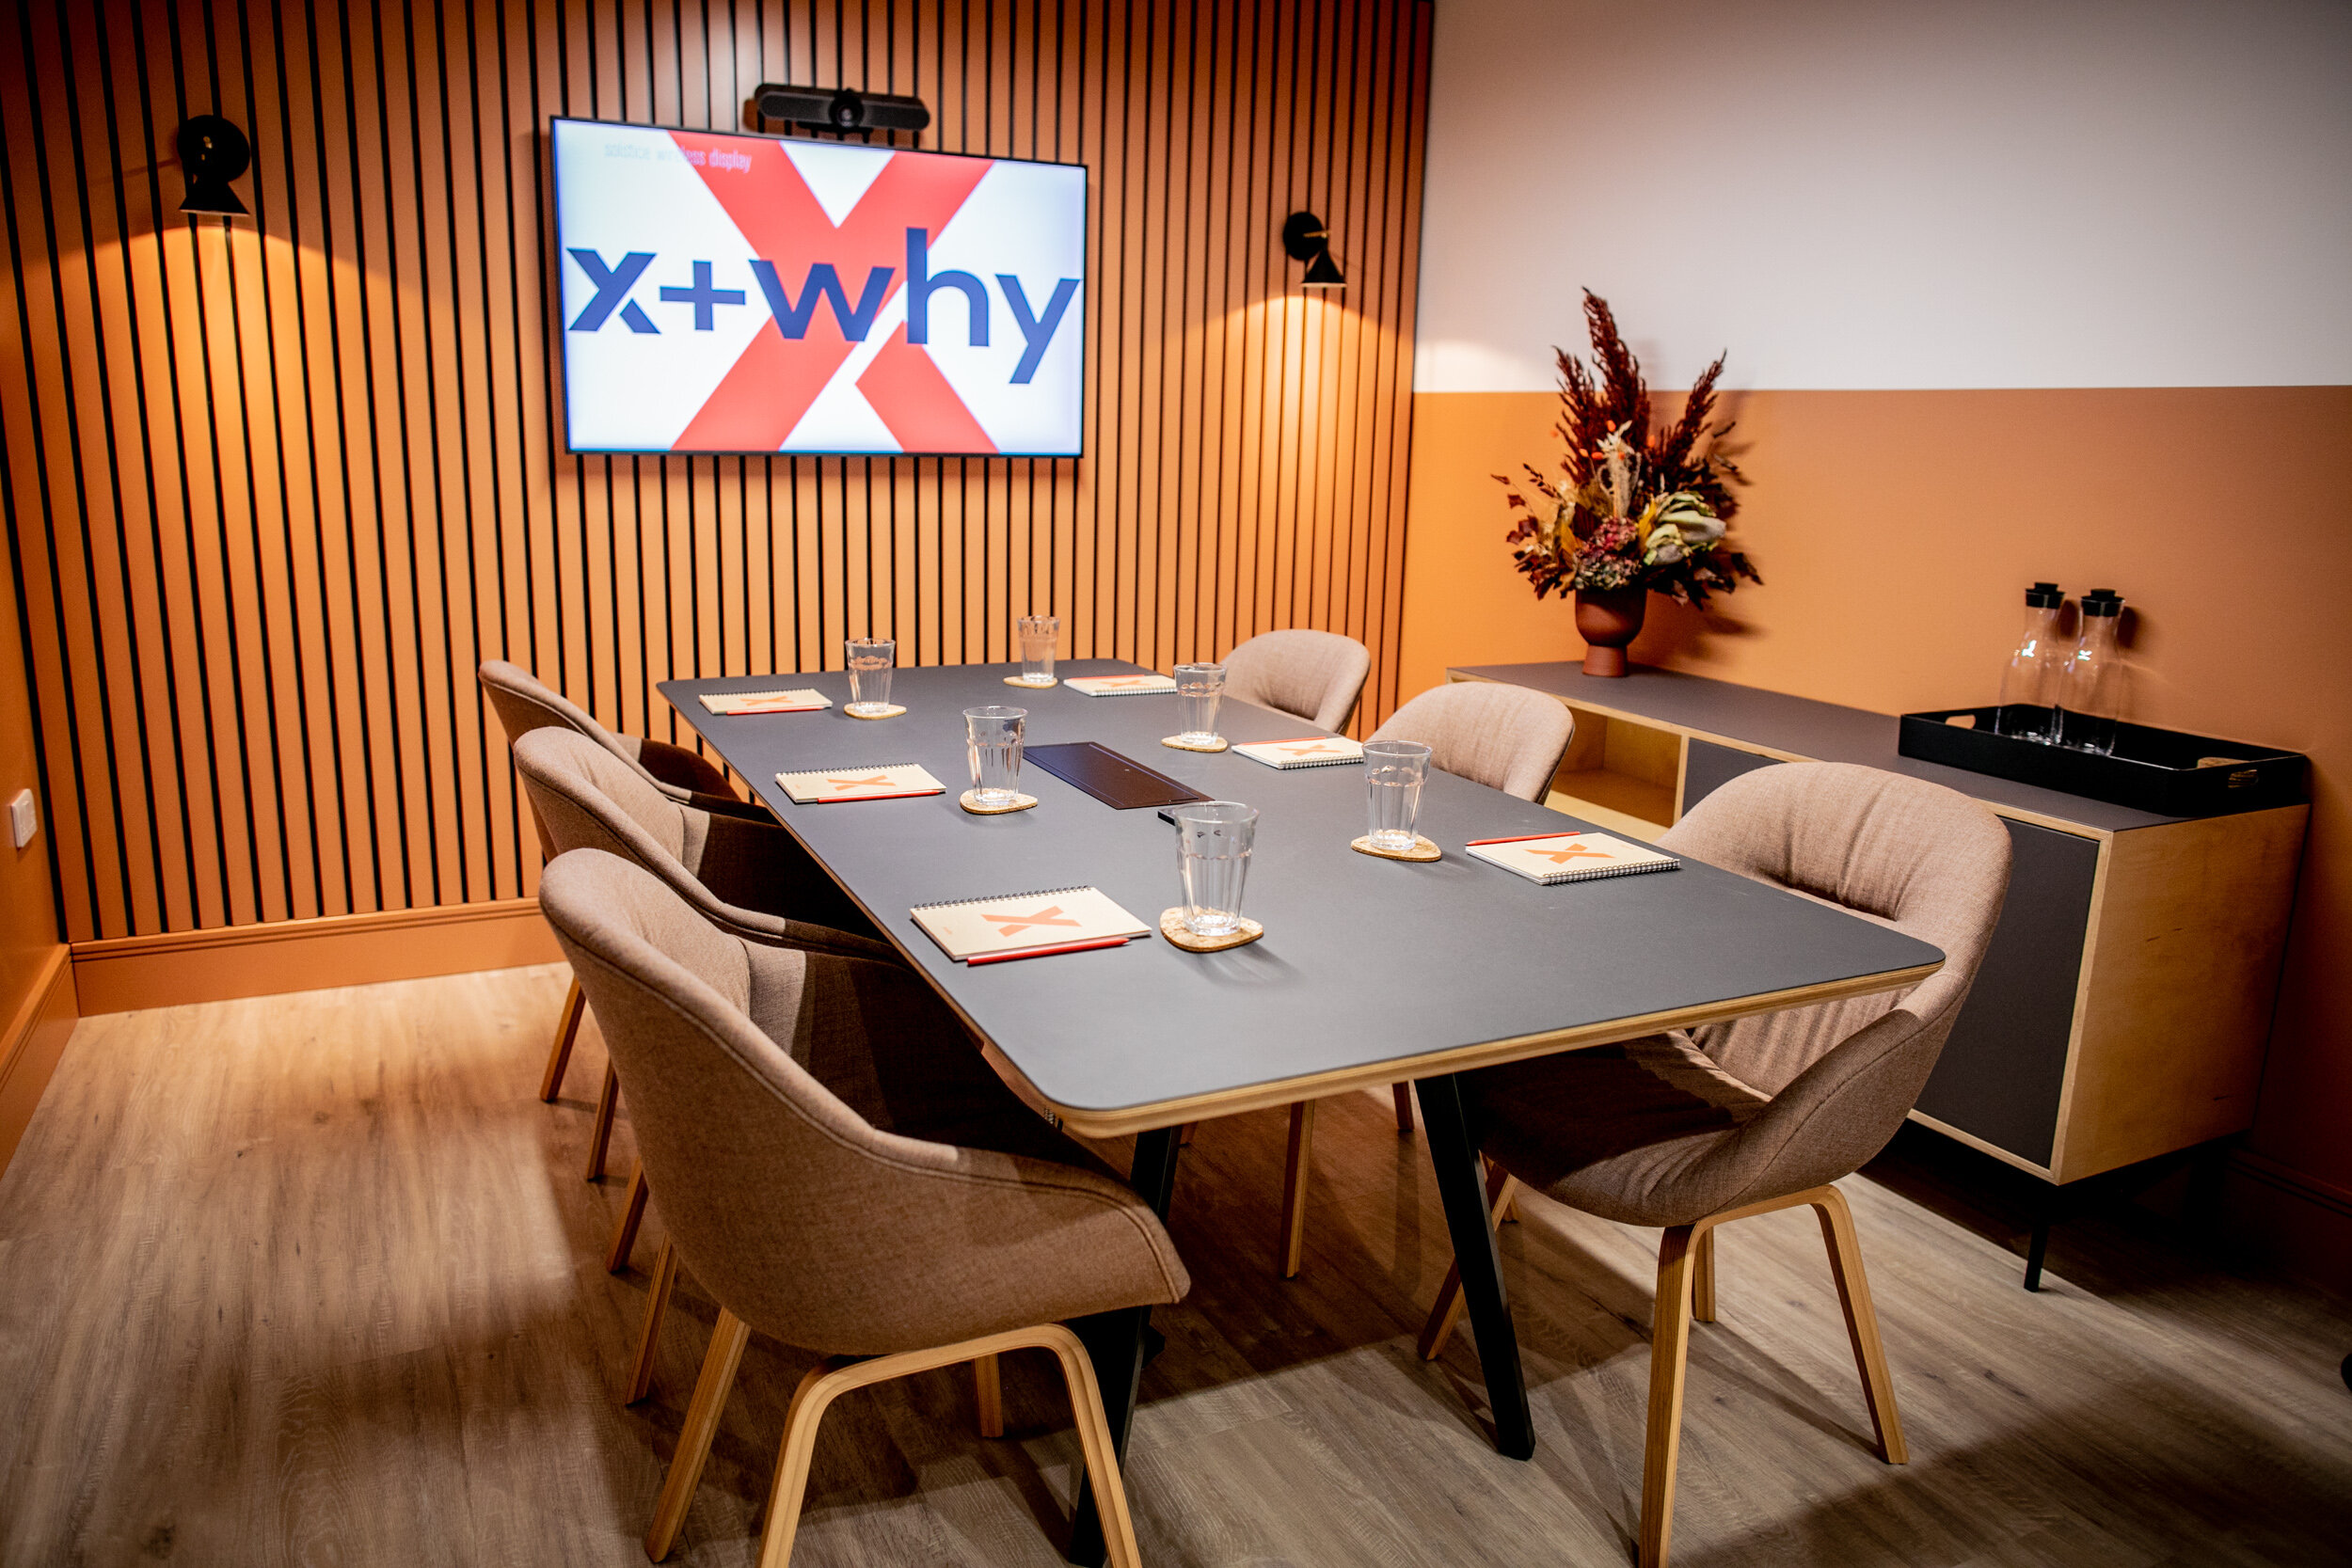 The Huddle meeting room at X+Why the Fulwood on Tally Market